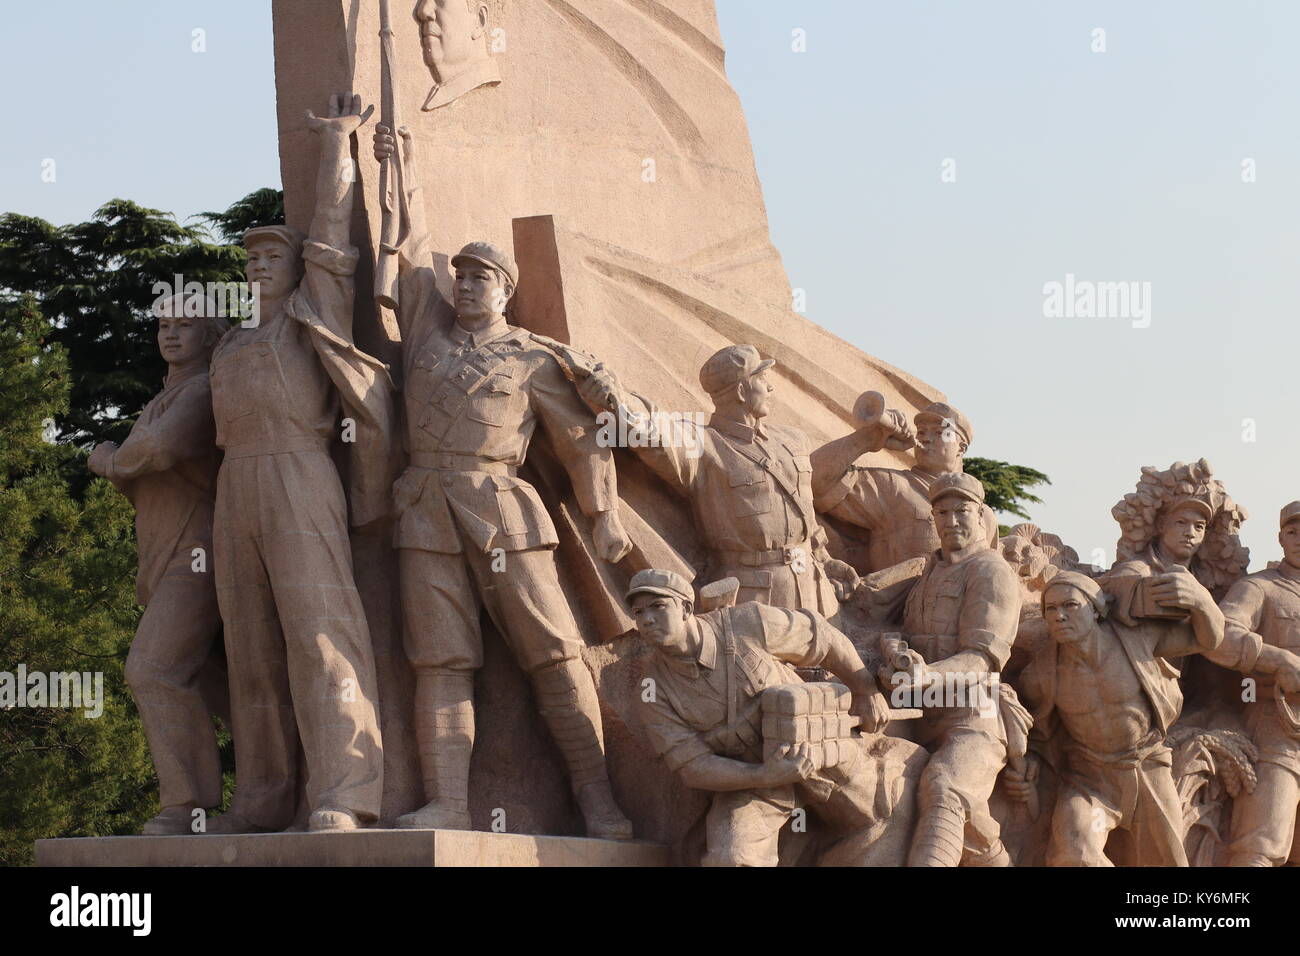 Sculpture outside Maos Mauseleum in Tiananmen Square in Beijing, China Stock Photo